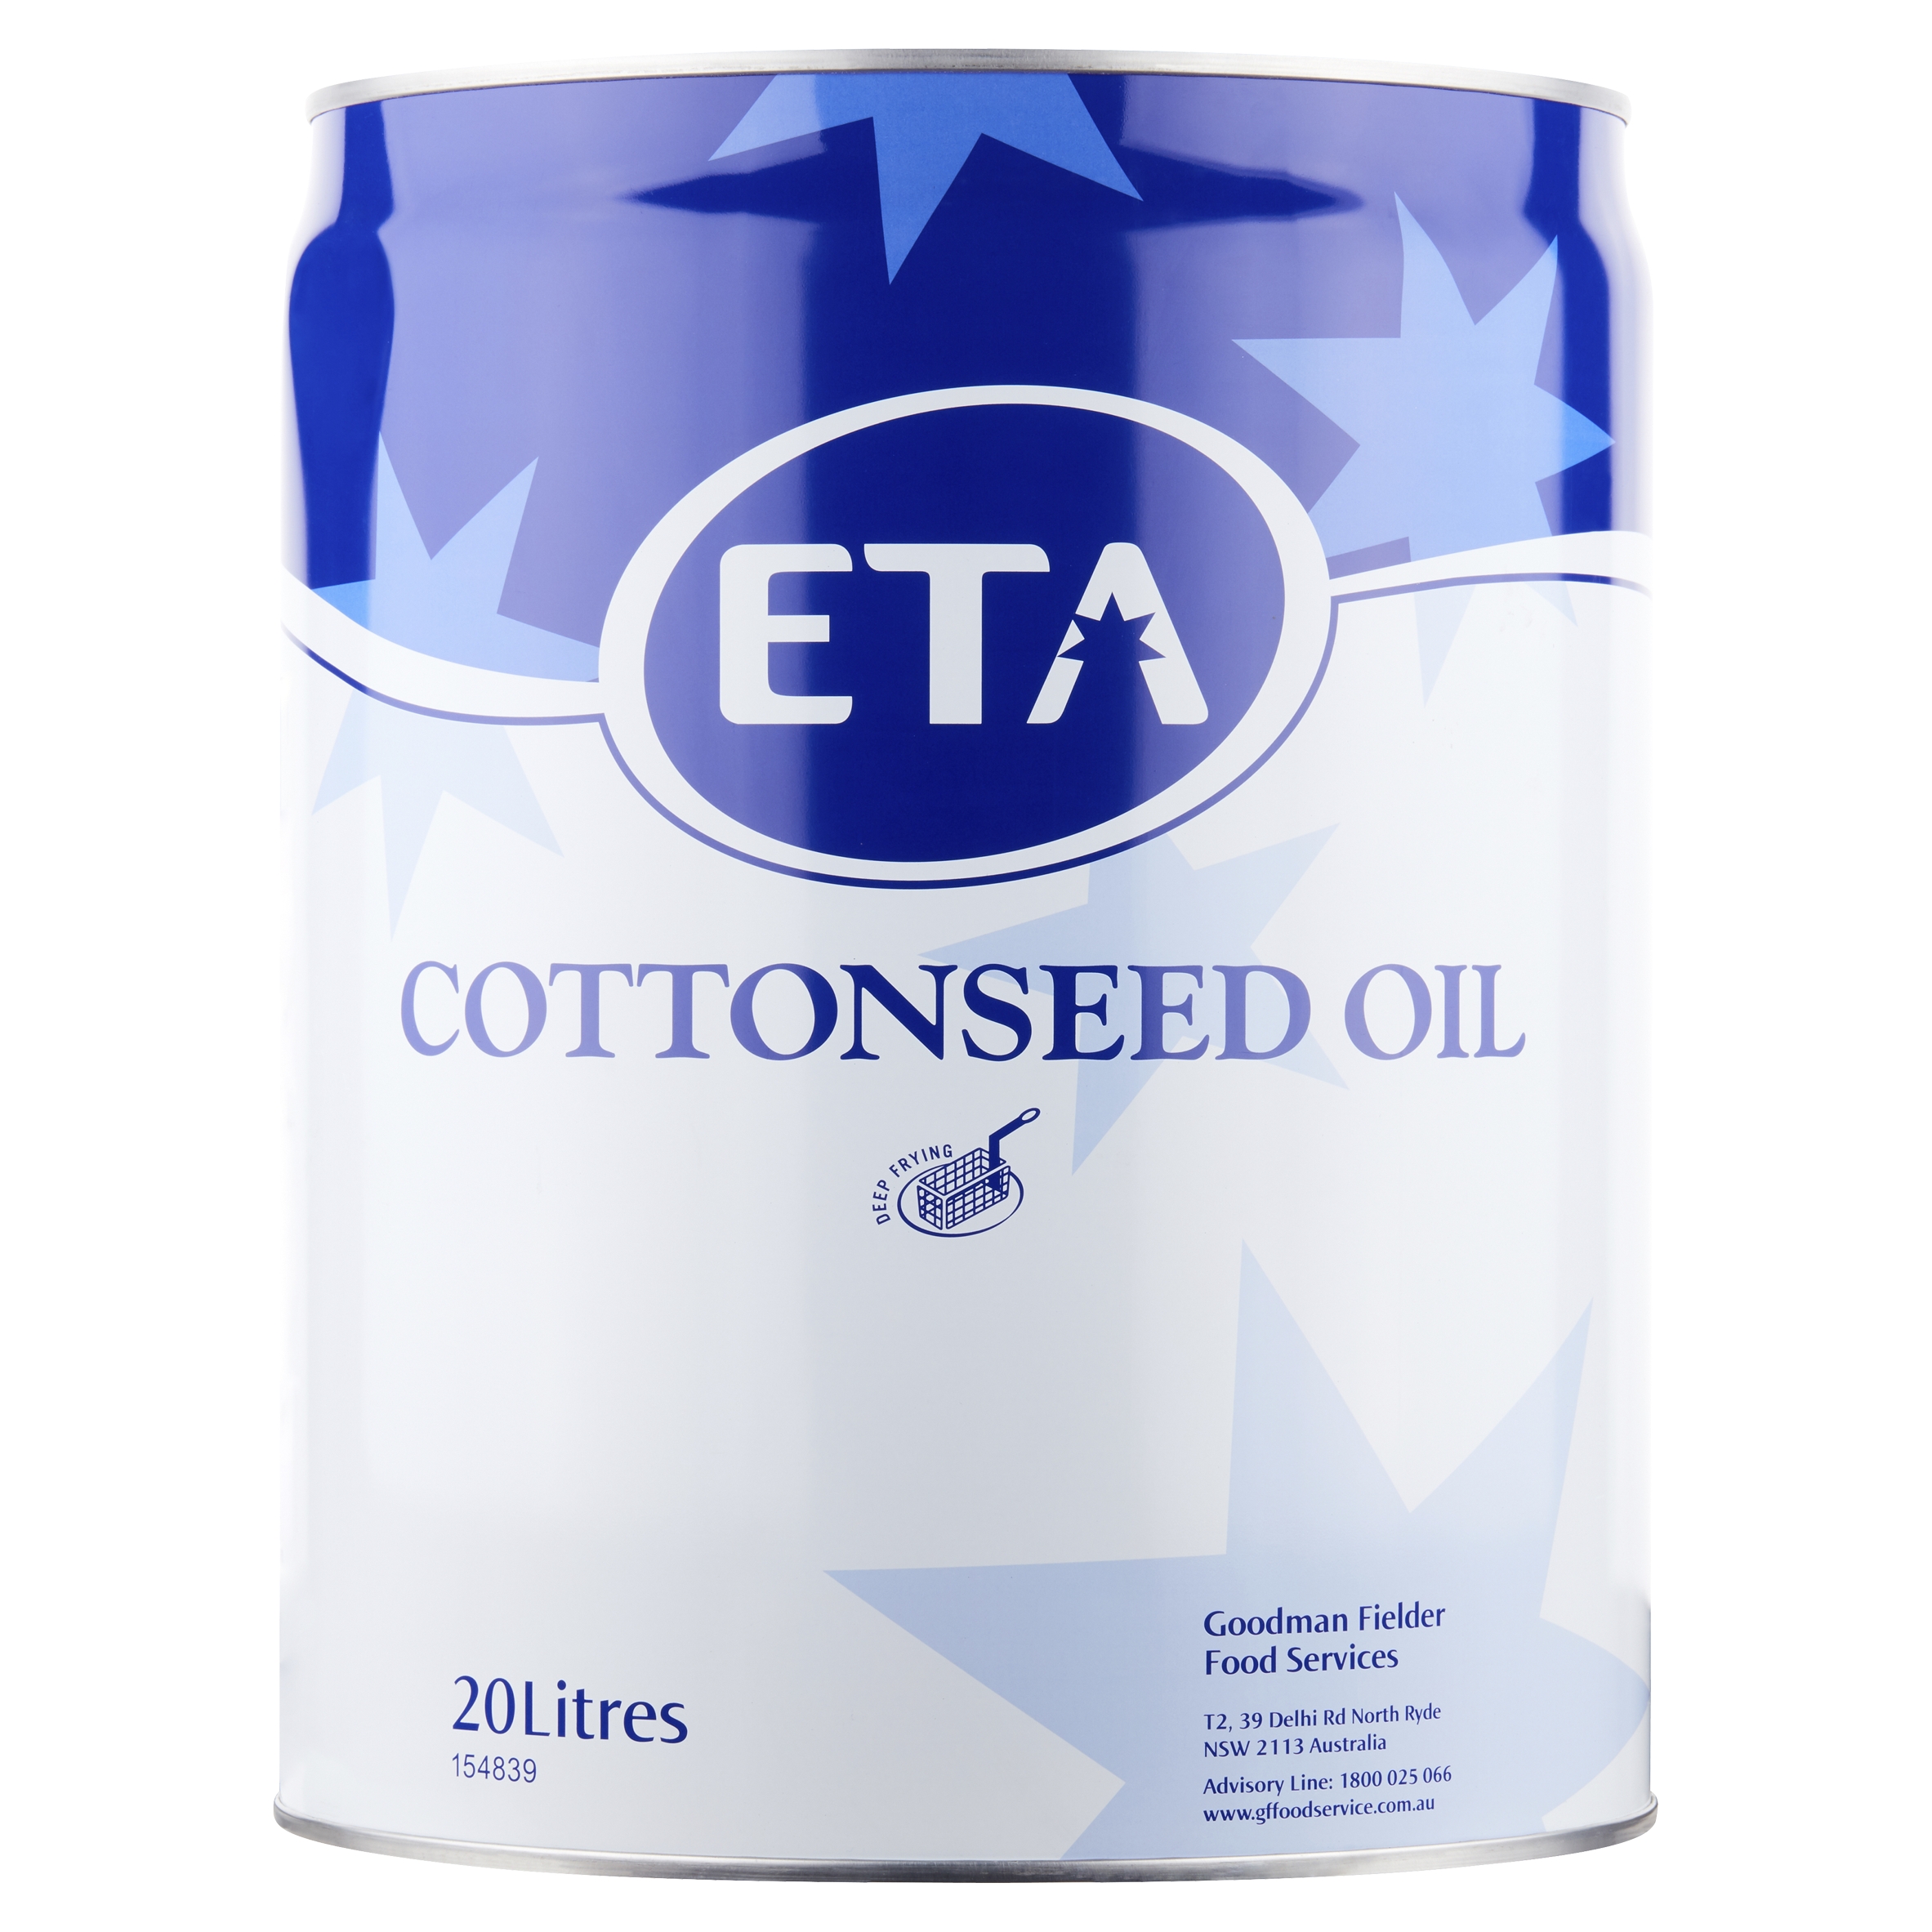 Eta Cottonseed Oil 20 Litres product photo